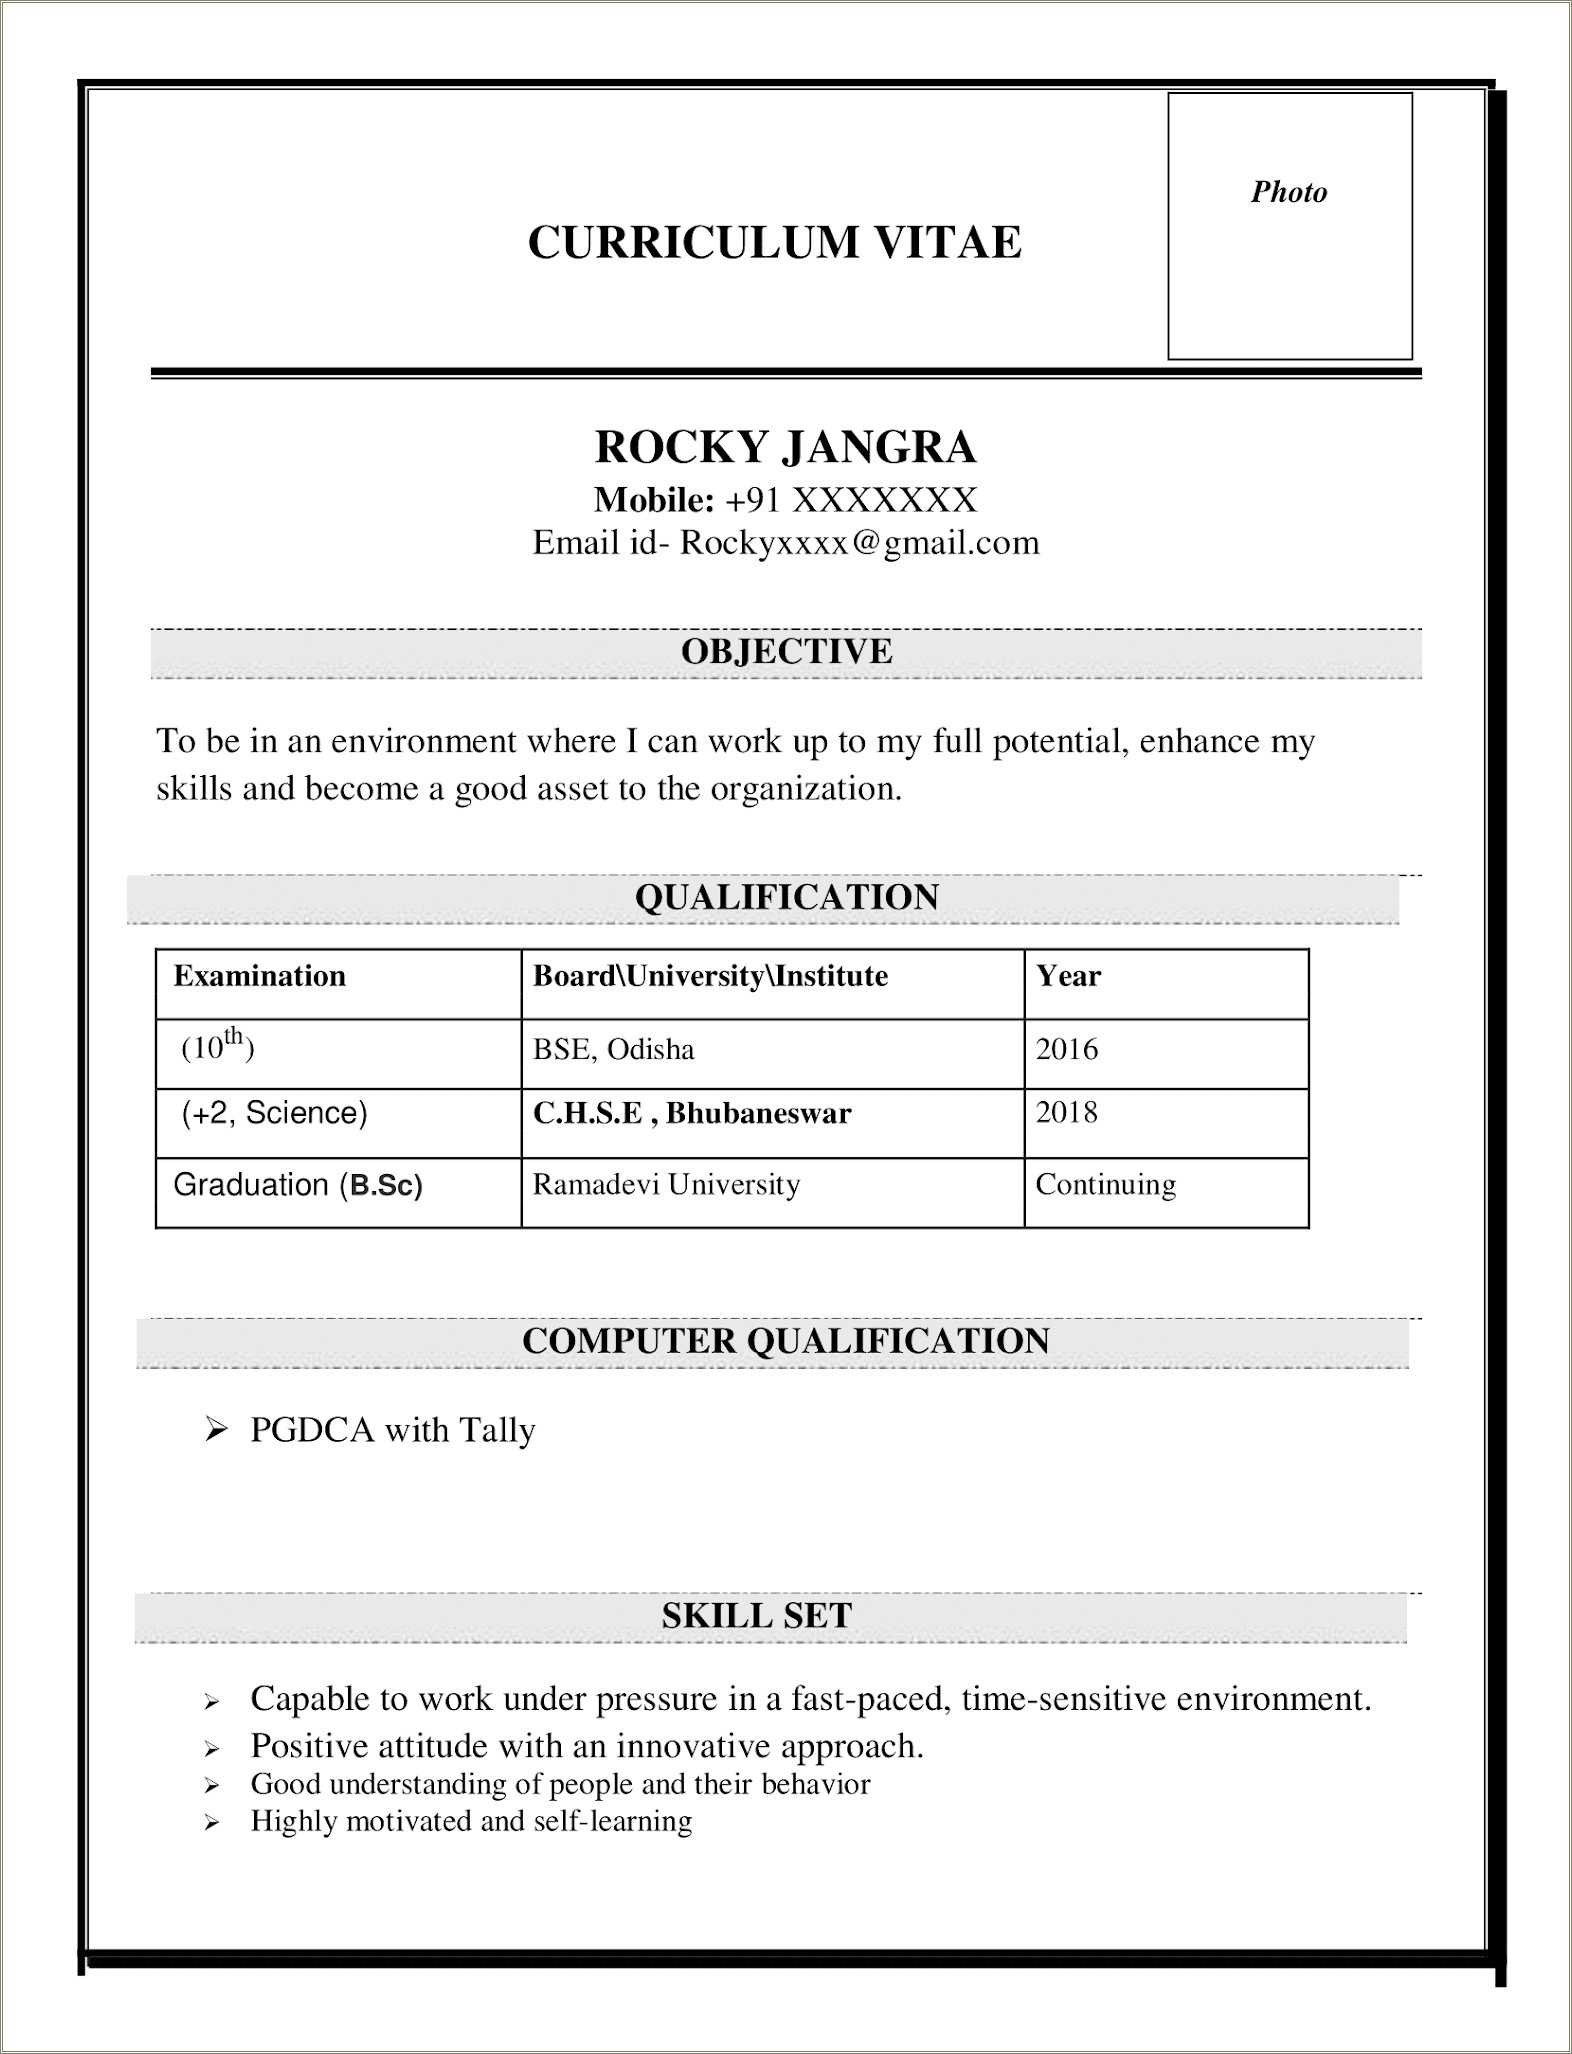 pdf-or-word-document-for-resume-resume-example-gallery